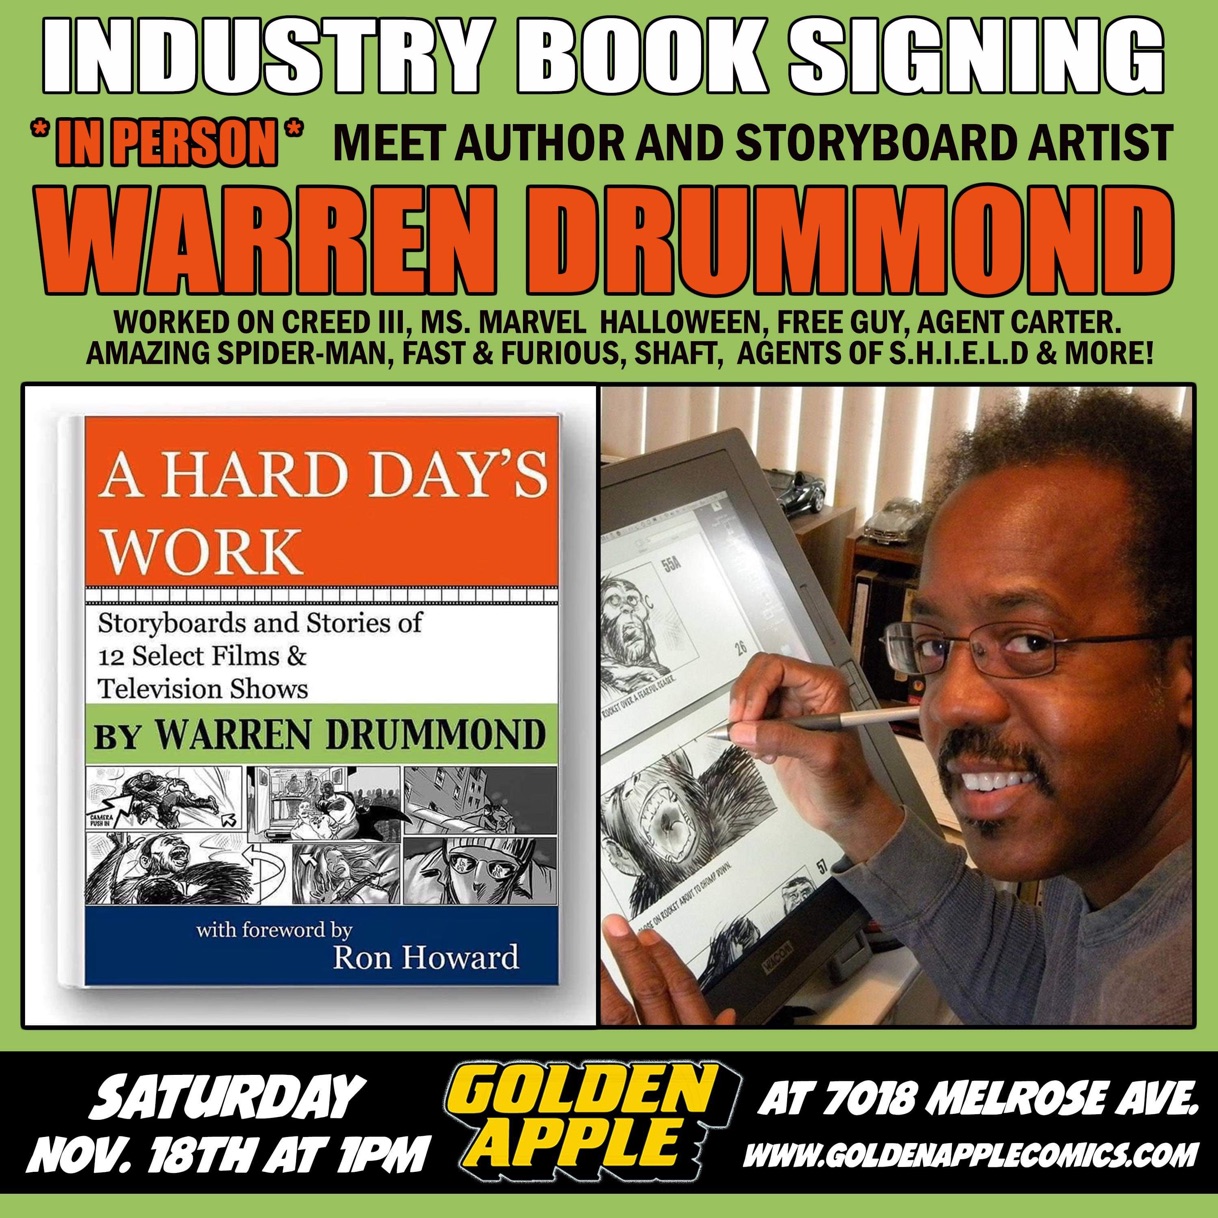 A poster for a book signing with warren drummond.